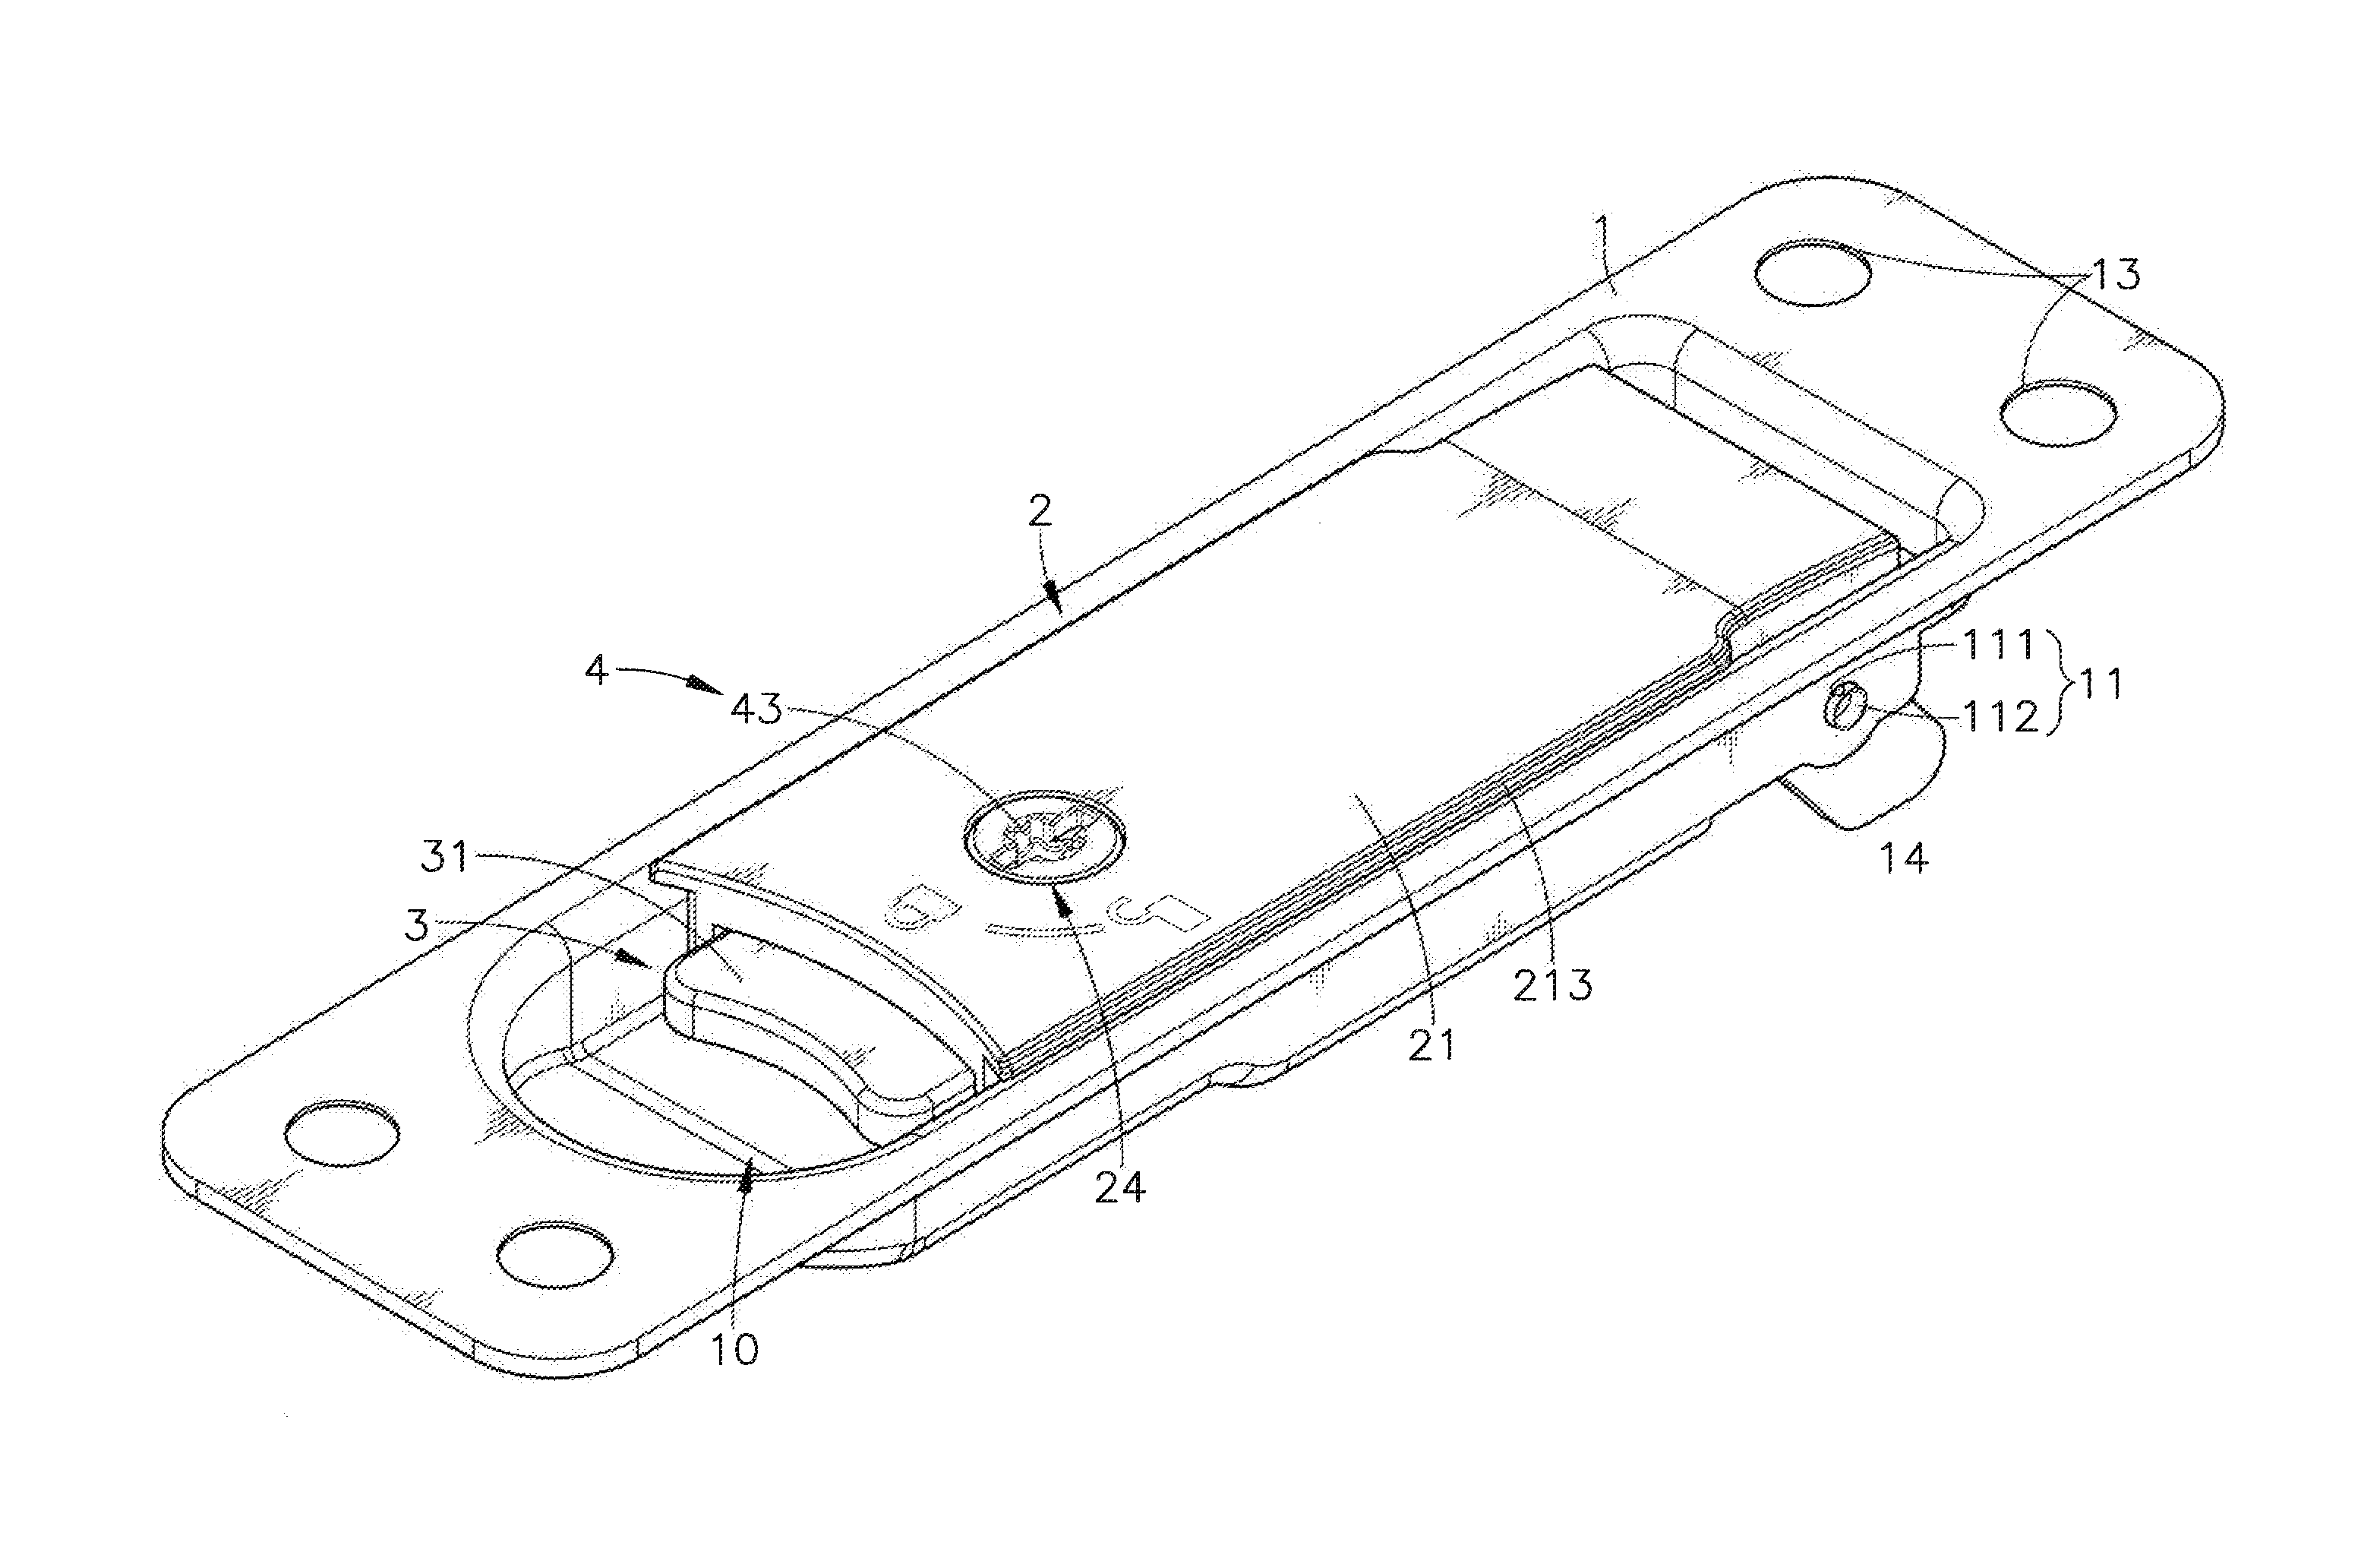 Outer shell member positioning device